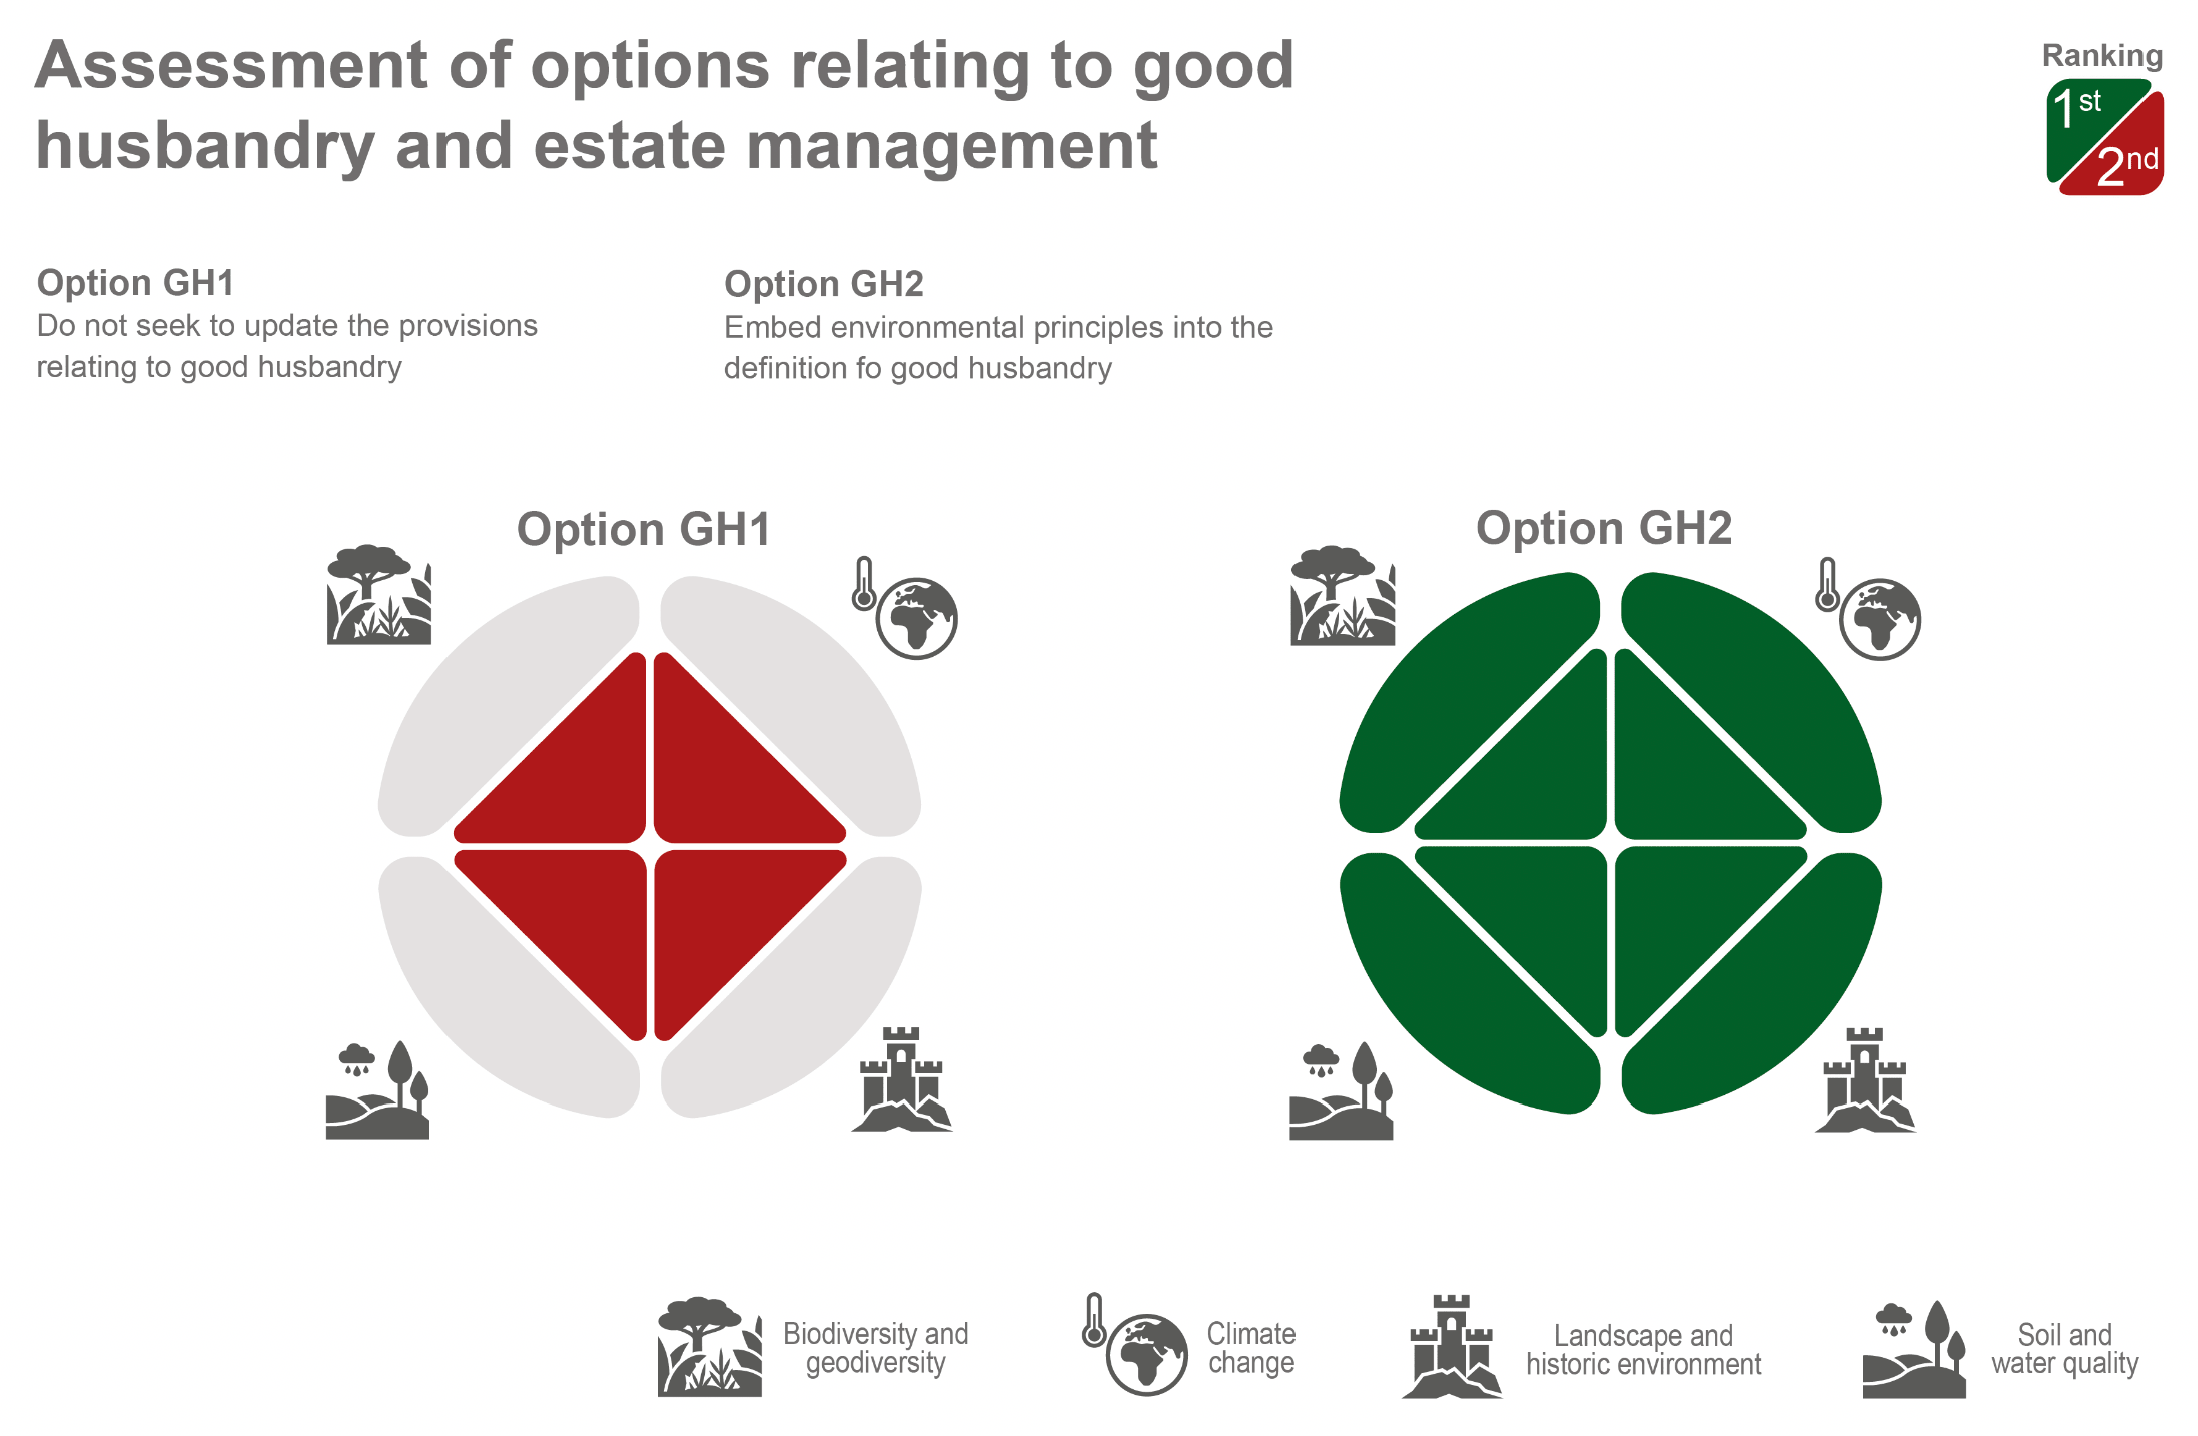 Infographic showing the assessment results of the two options relating to good husbandry and estate management.  Option GH2 performs more favourably than Option GH1 across all four SEA topics.